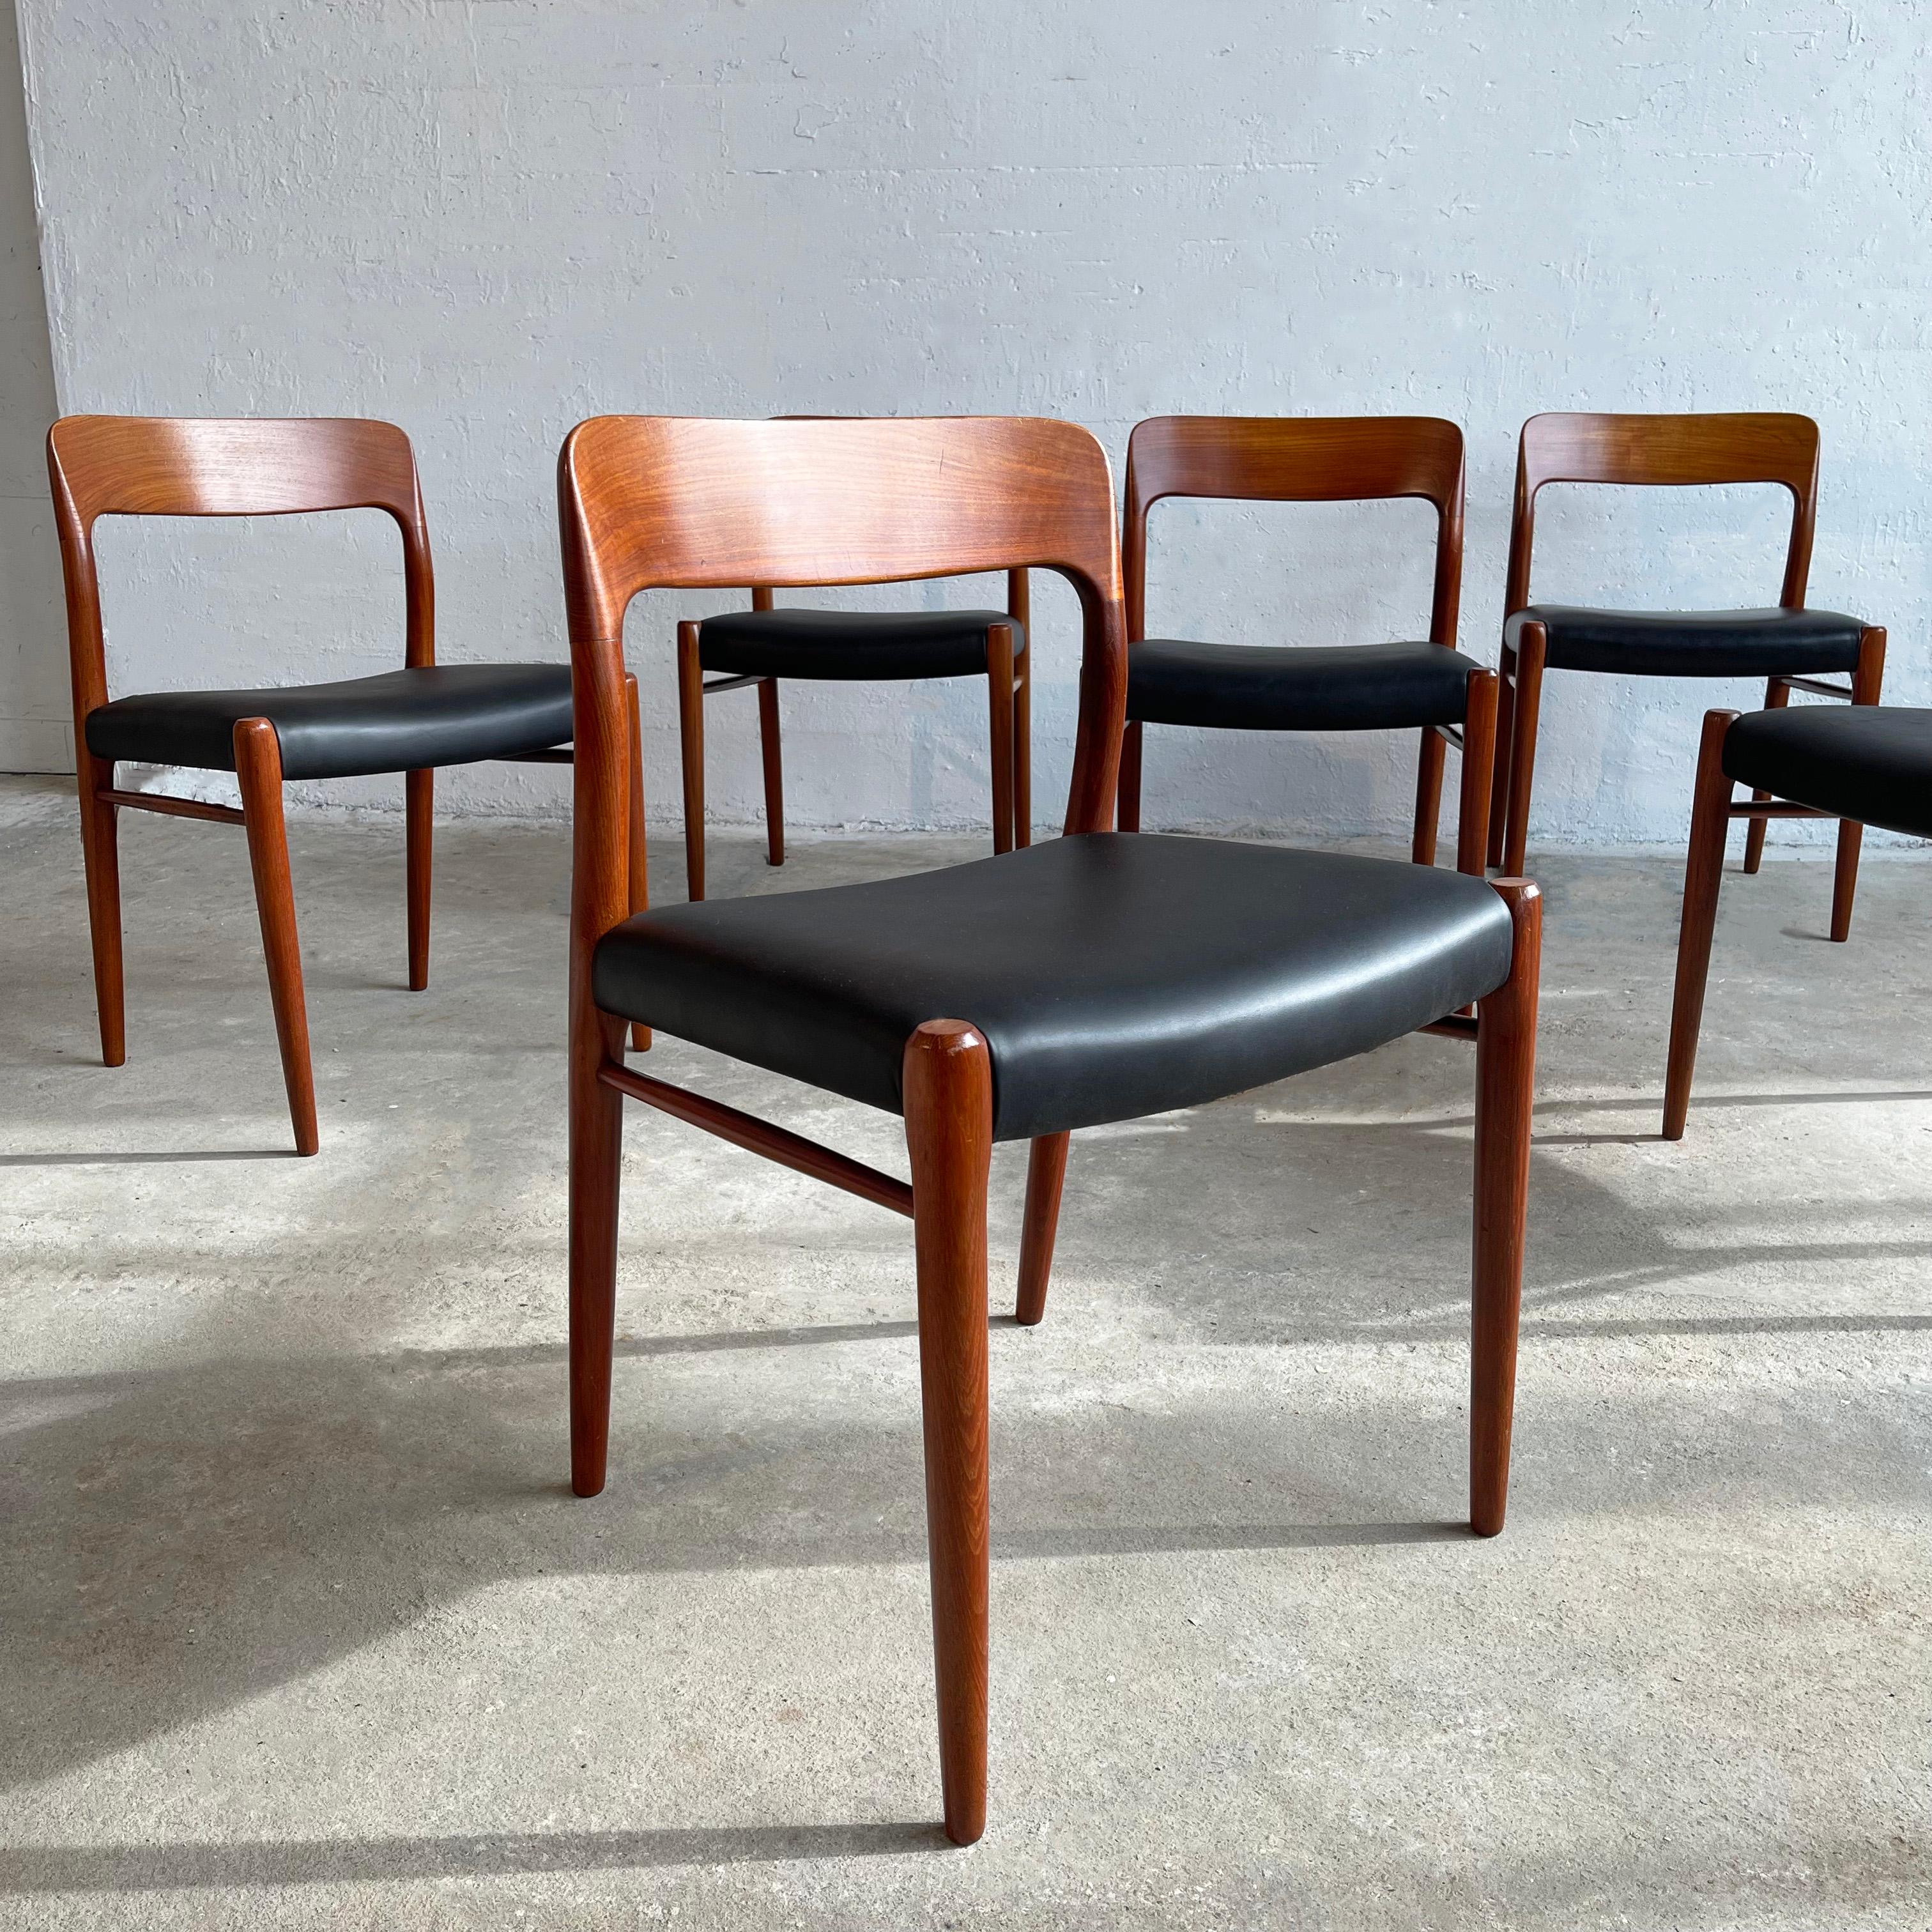 20th Century Teak And Leather Model 75 Dining Chairs By Niels O Møller For Sale